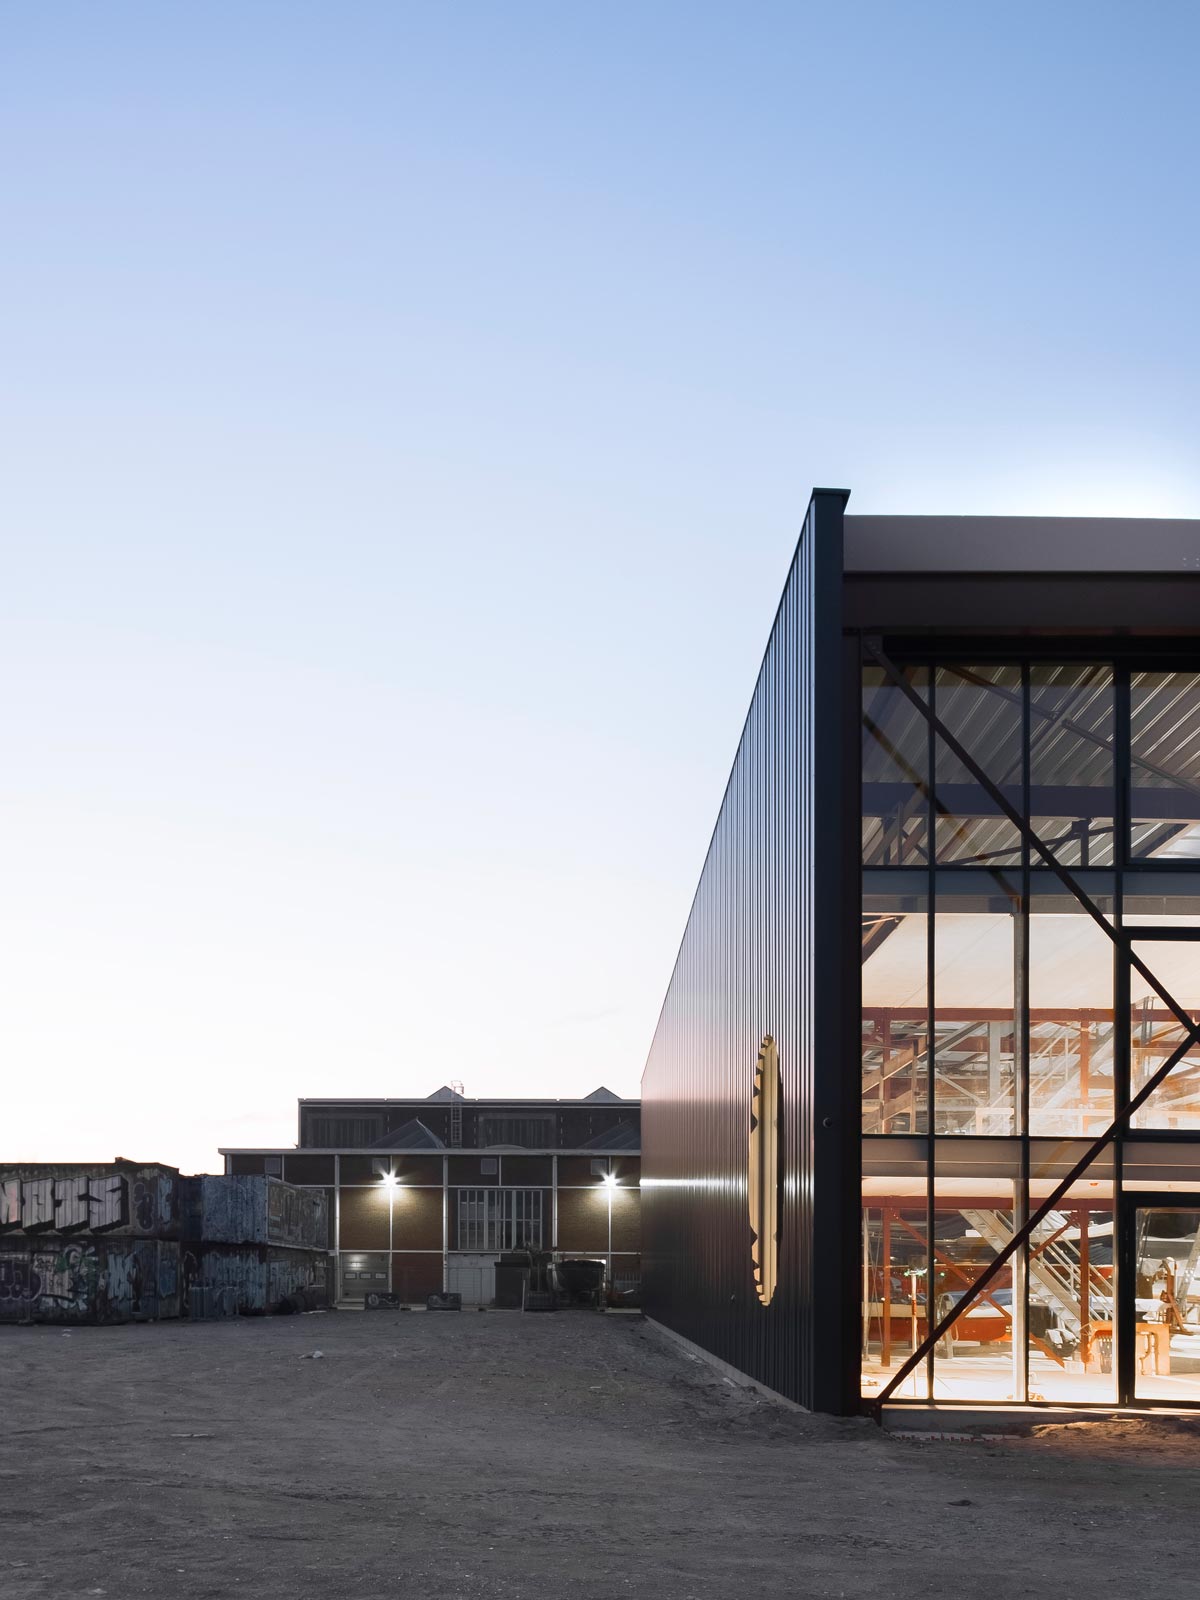 exterior dusk photo showing the office of Boat Hangar and the NDSM shipbuilding warehouse in the background by BETA architects Evert Klinkenberg Auguste Gus van Oppen